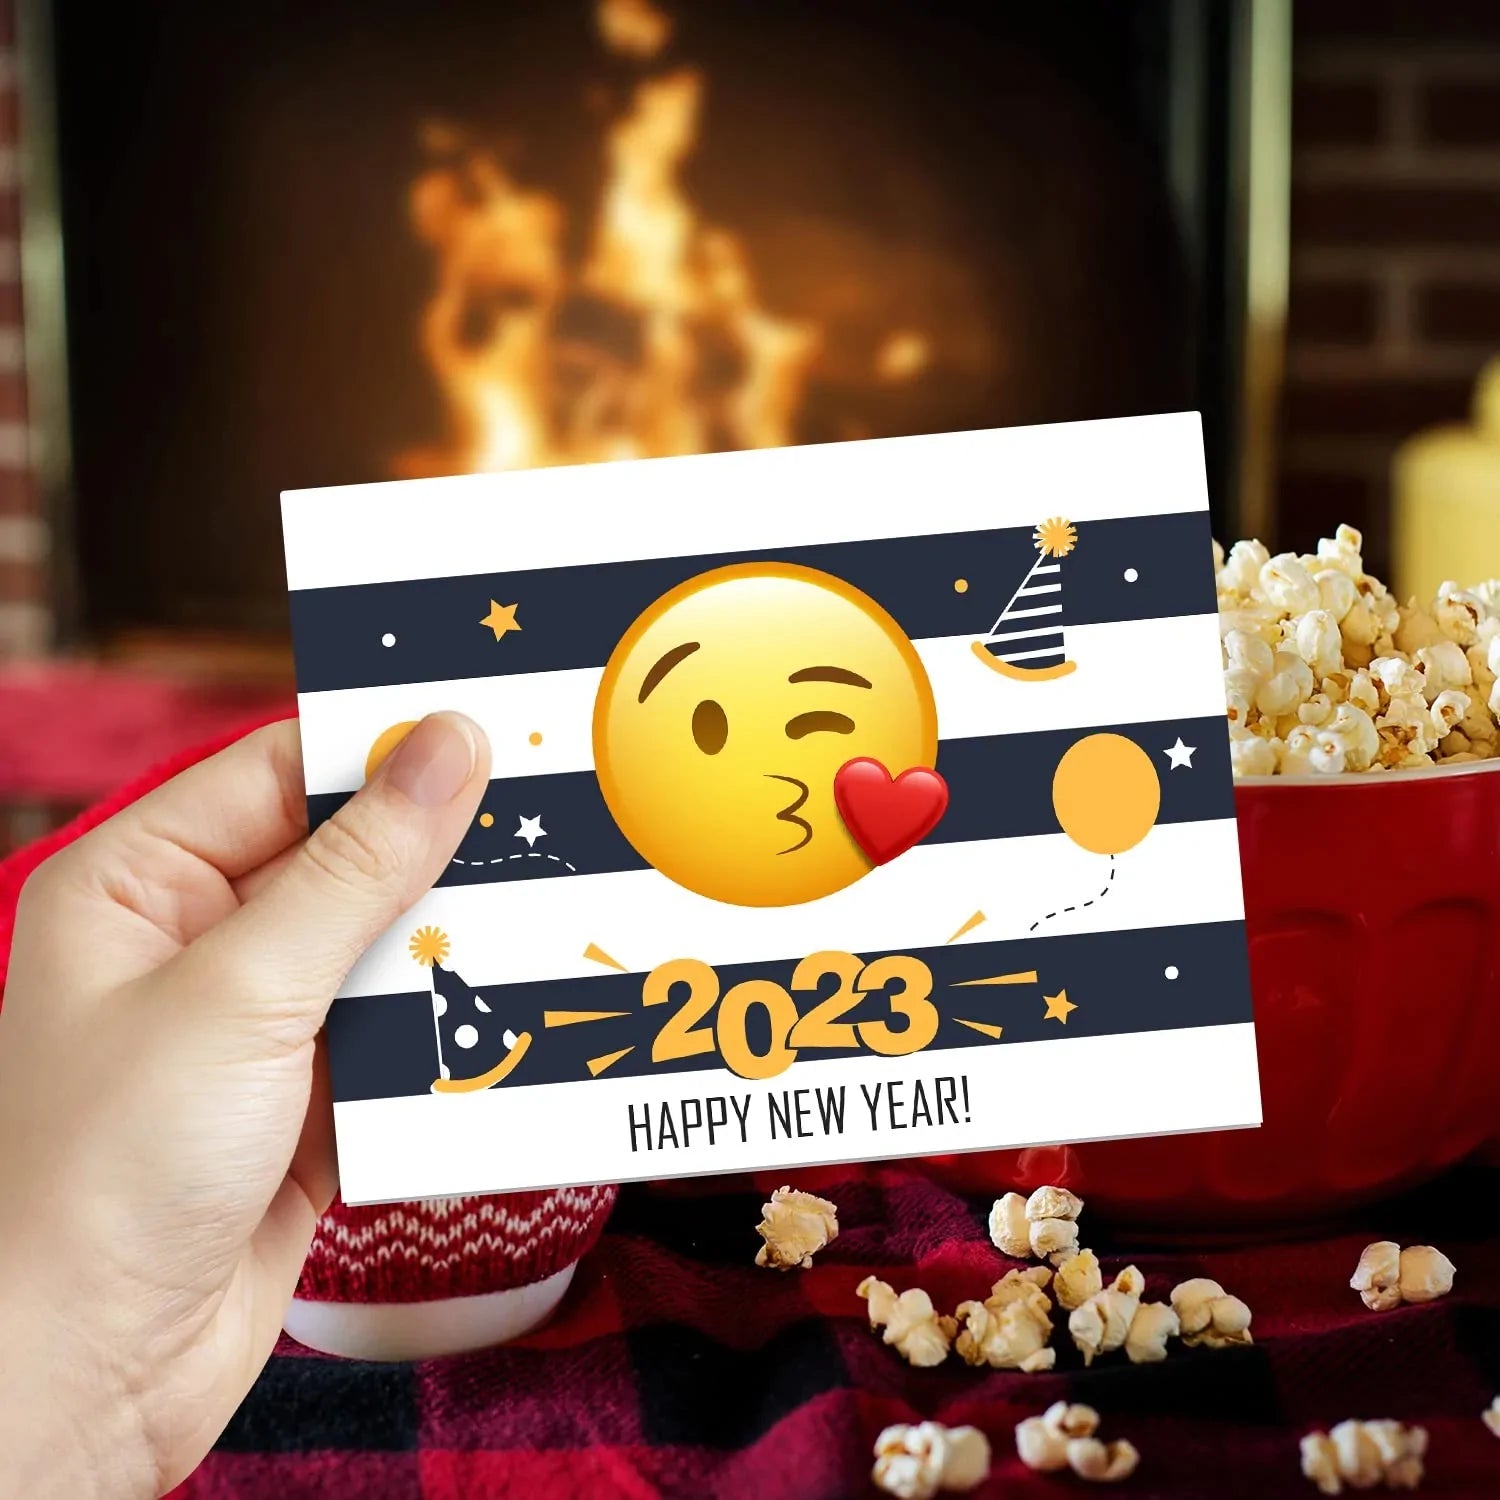 2023 Have A Happy New Year Cards Holiday Love Greetings Emoji. Set of 25 FoldCard